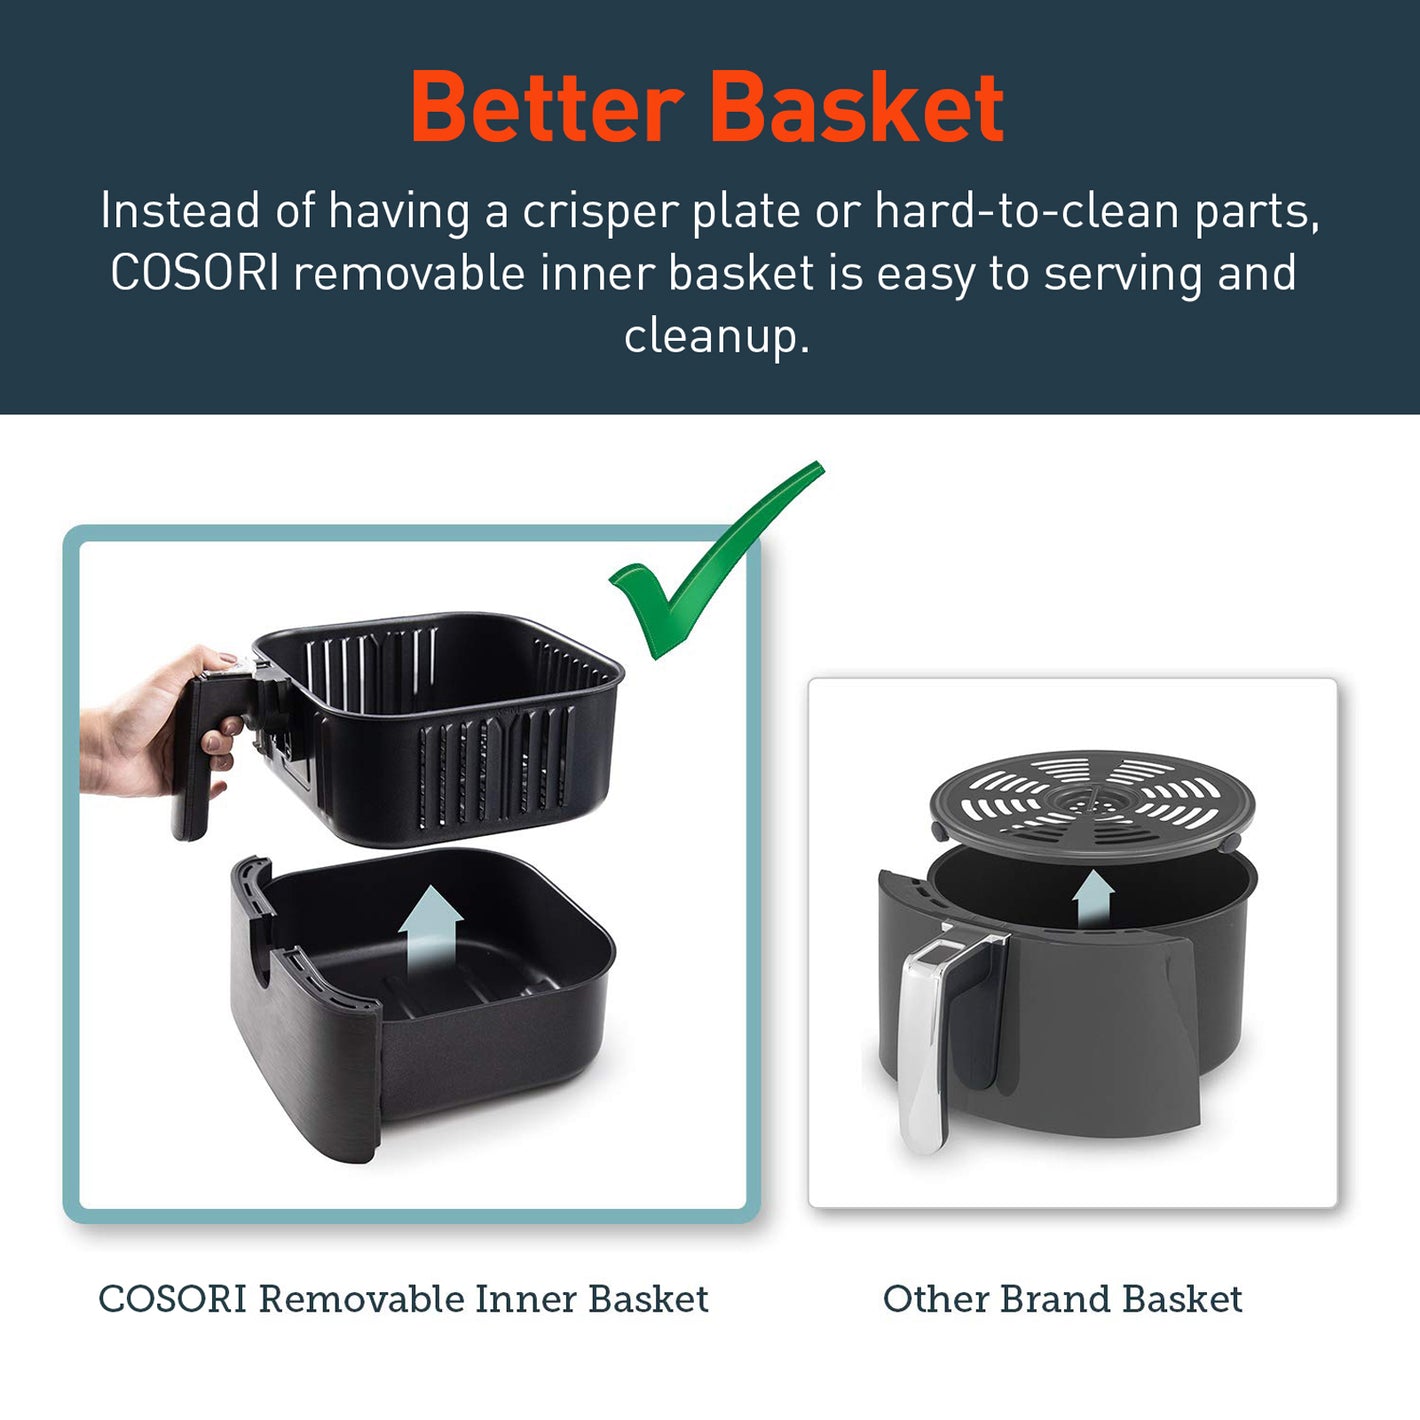 Better Basket Instead of having a crisper plate or hard-to-clean parts,COSORI removable inner basket is easy to serving and cleanup. COSORI Removable Inner Basket Other Brand Basket